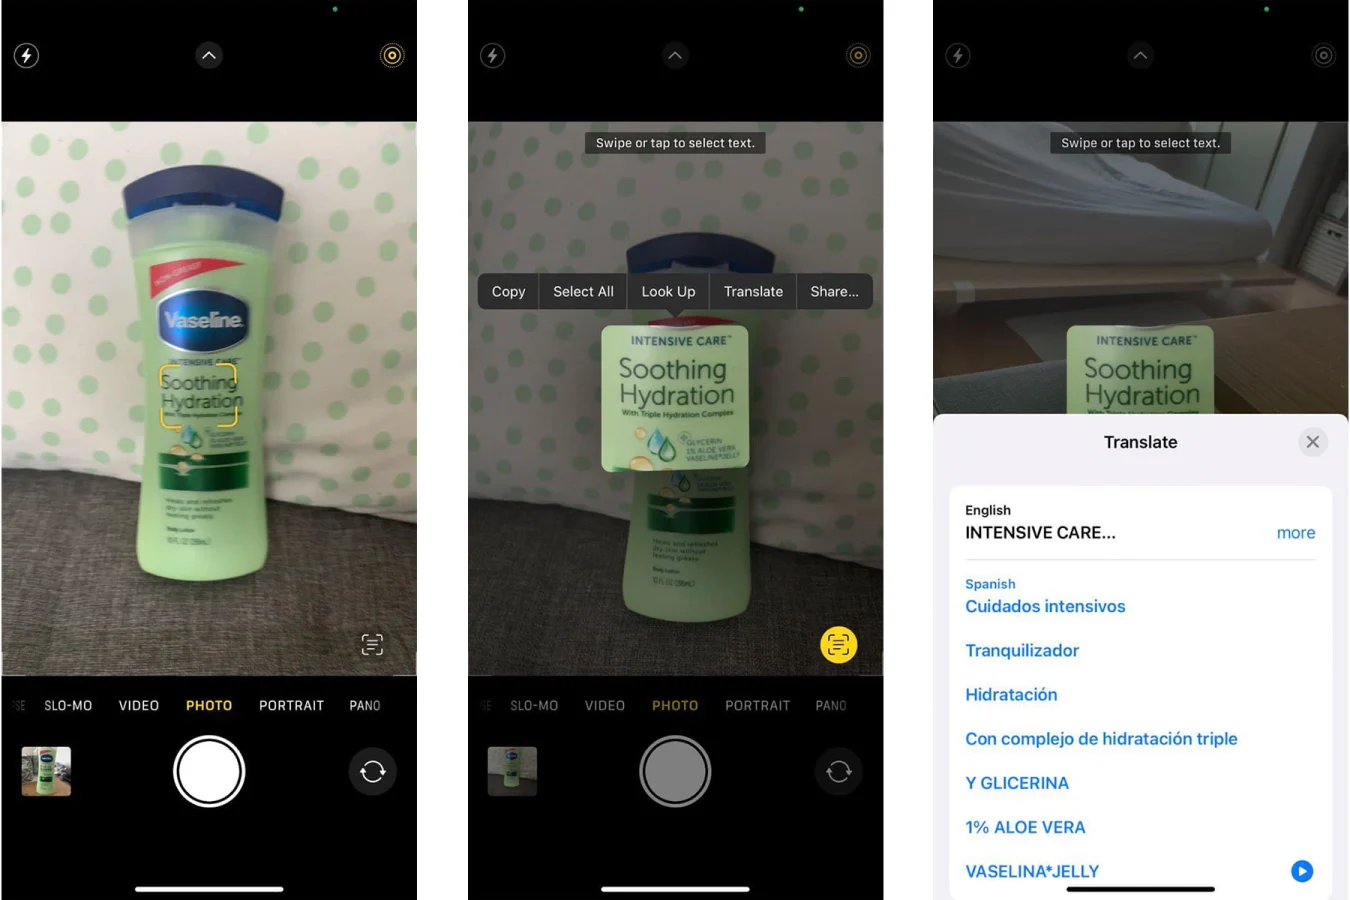 A composite showing three screenshots of Apple's Live Text feature through the viewfinder in the Camera app in the iOS 15 beta. The left screenshot shows a small yellow frame focused on the middle of a bottle of green moisturizer, the middle screenshot shows the middle part of the bottle highlighted with options above it for 